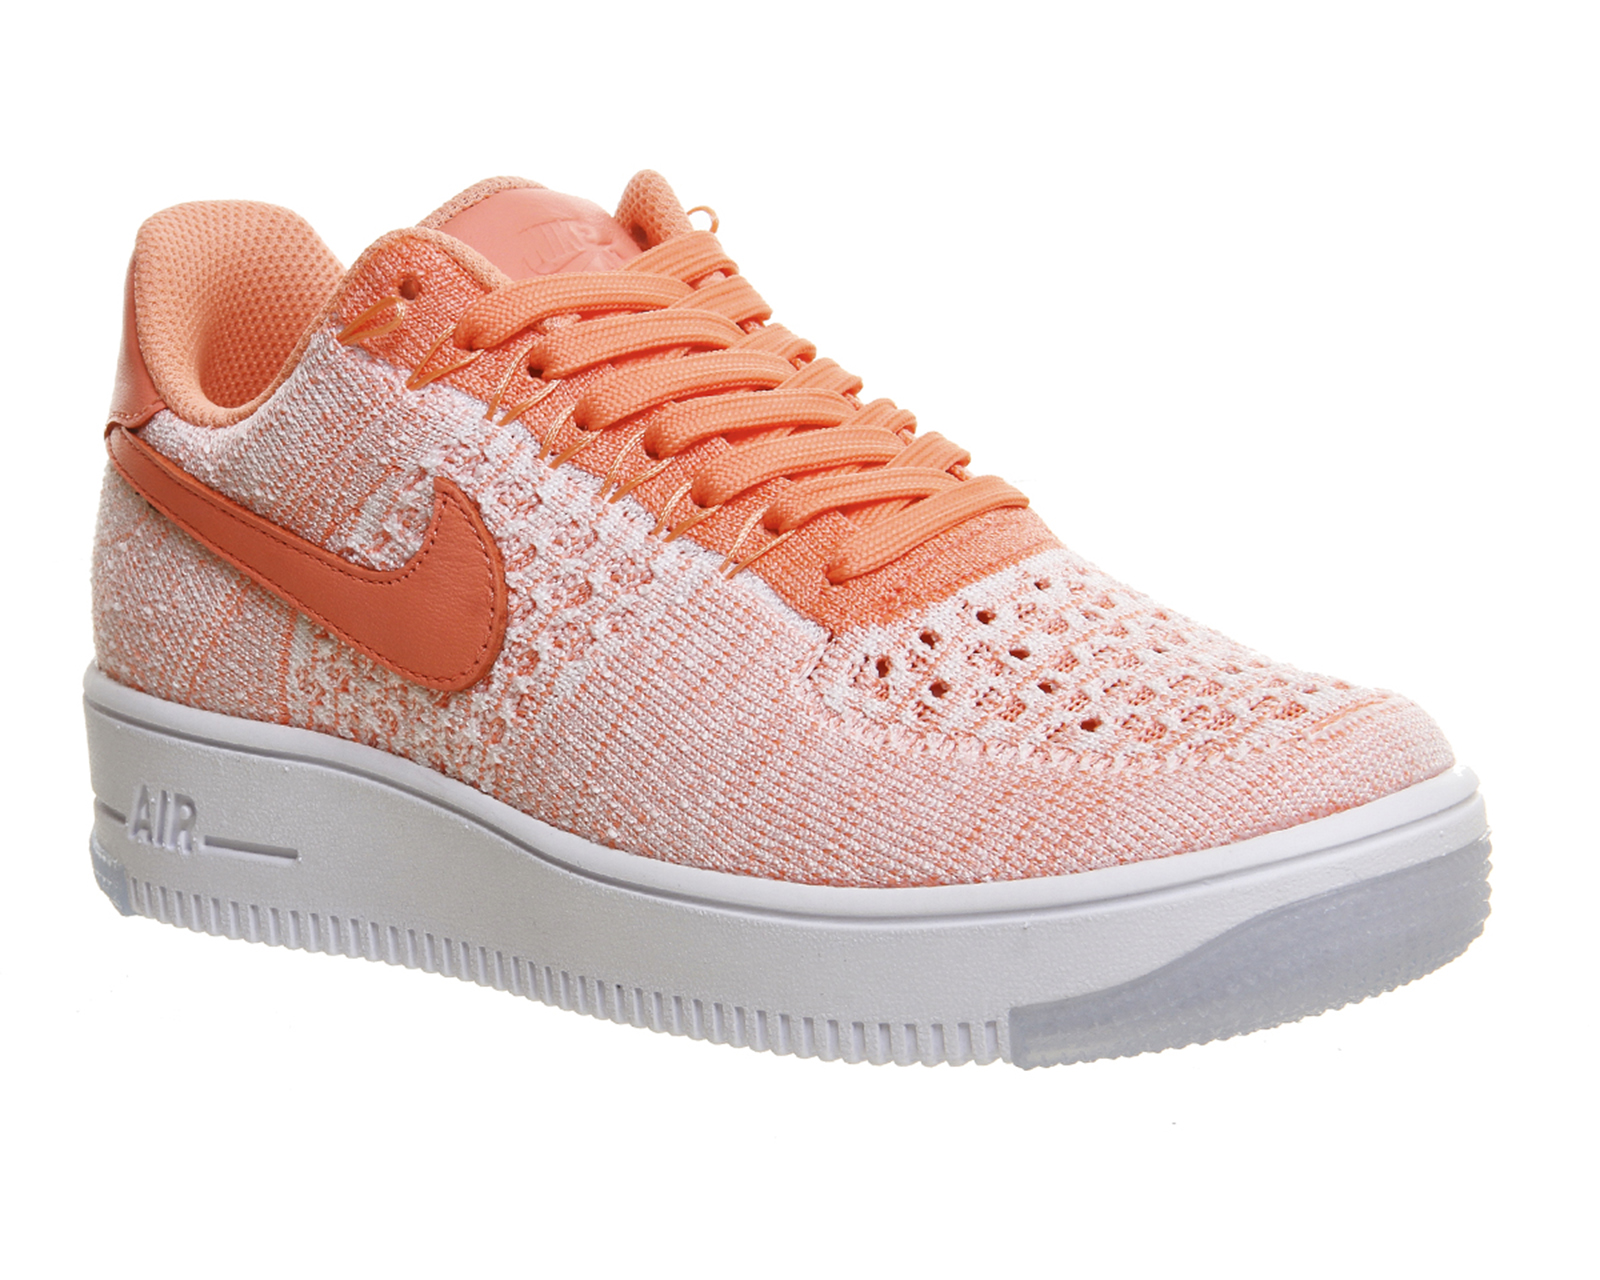 Junior Air Force 1 Flyknit Sweden, SAVE 52% - aveclumiere.com